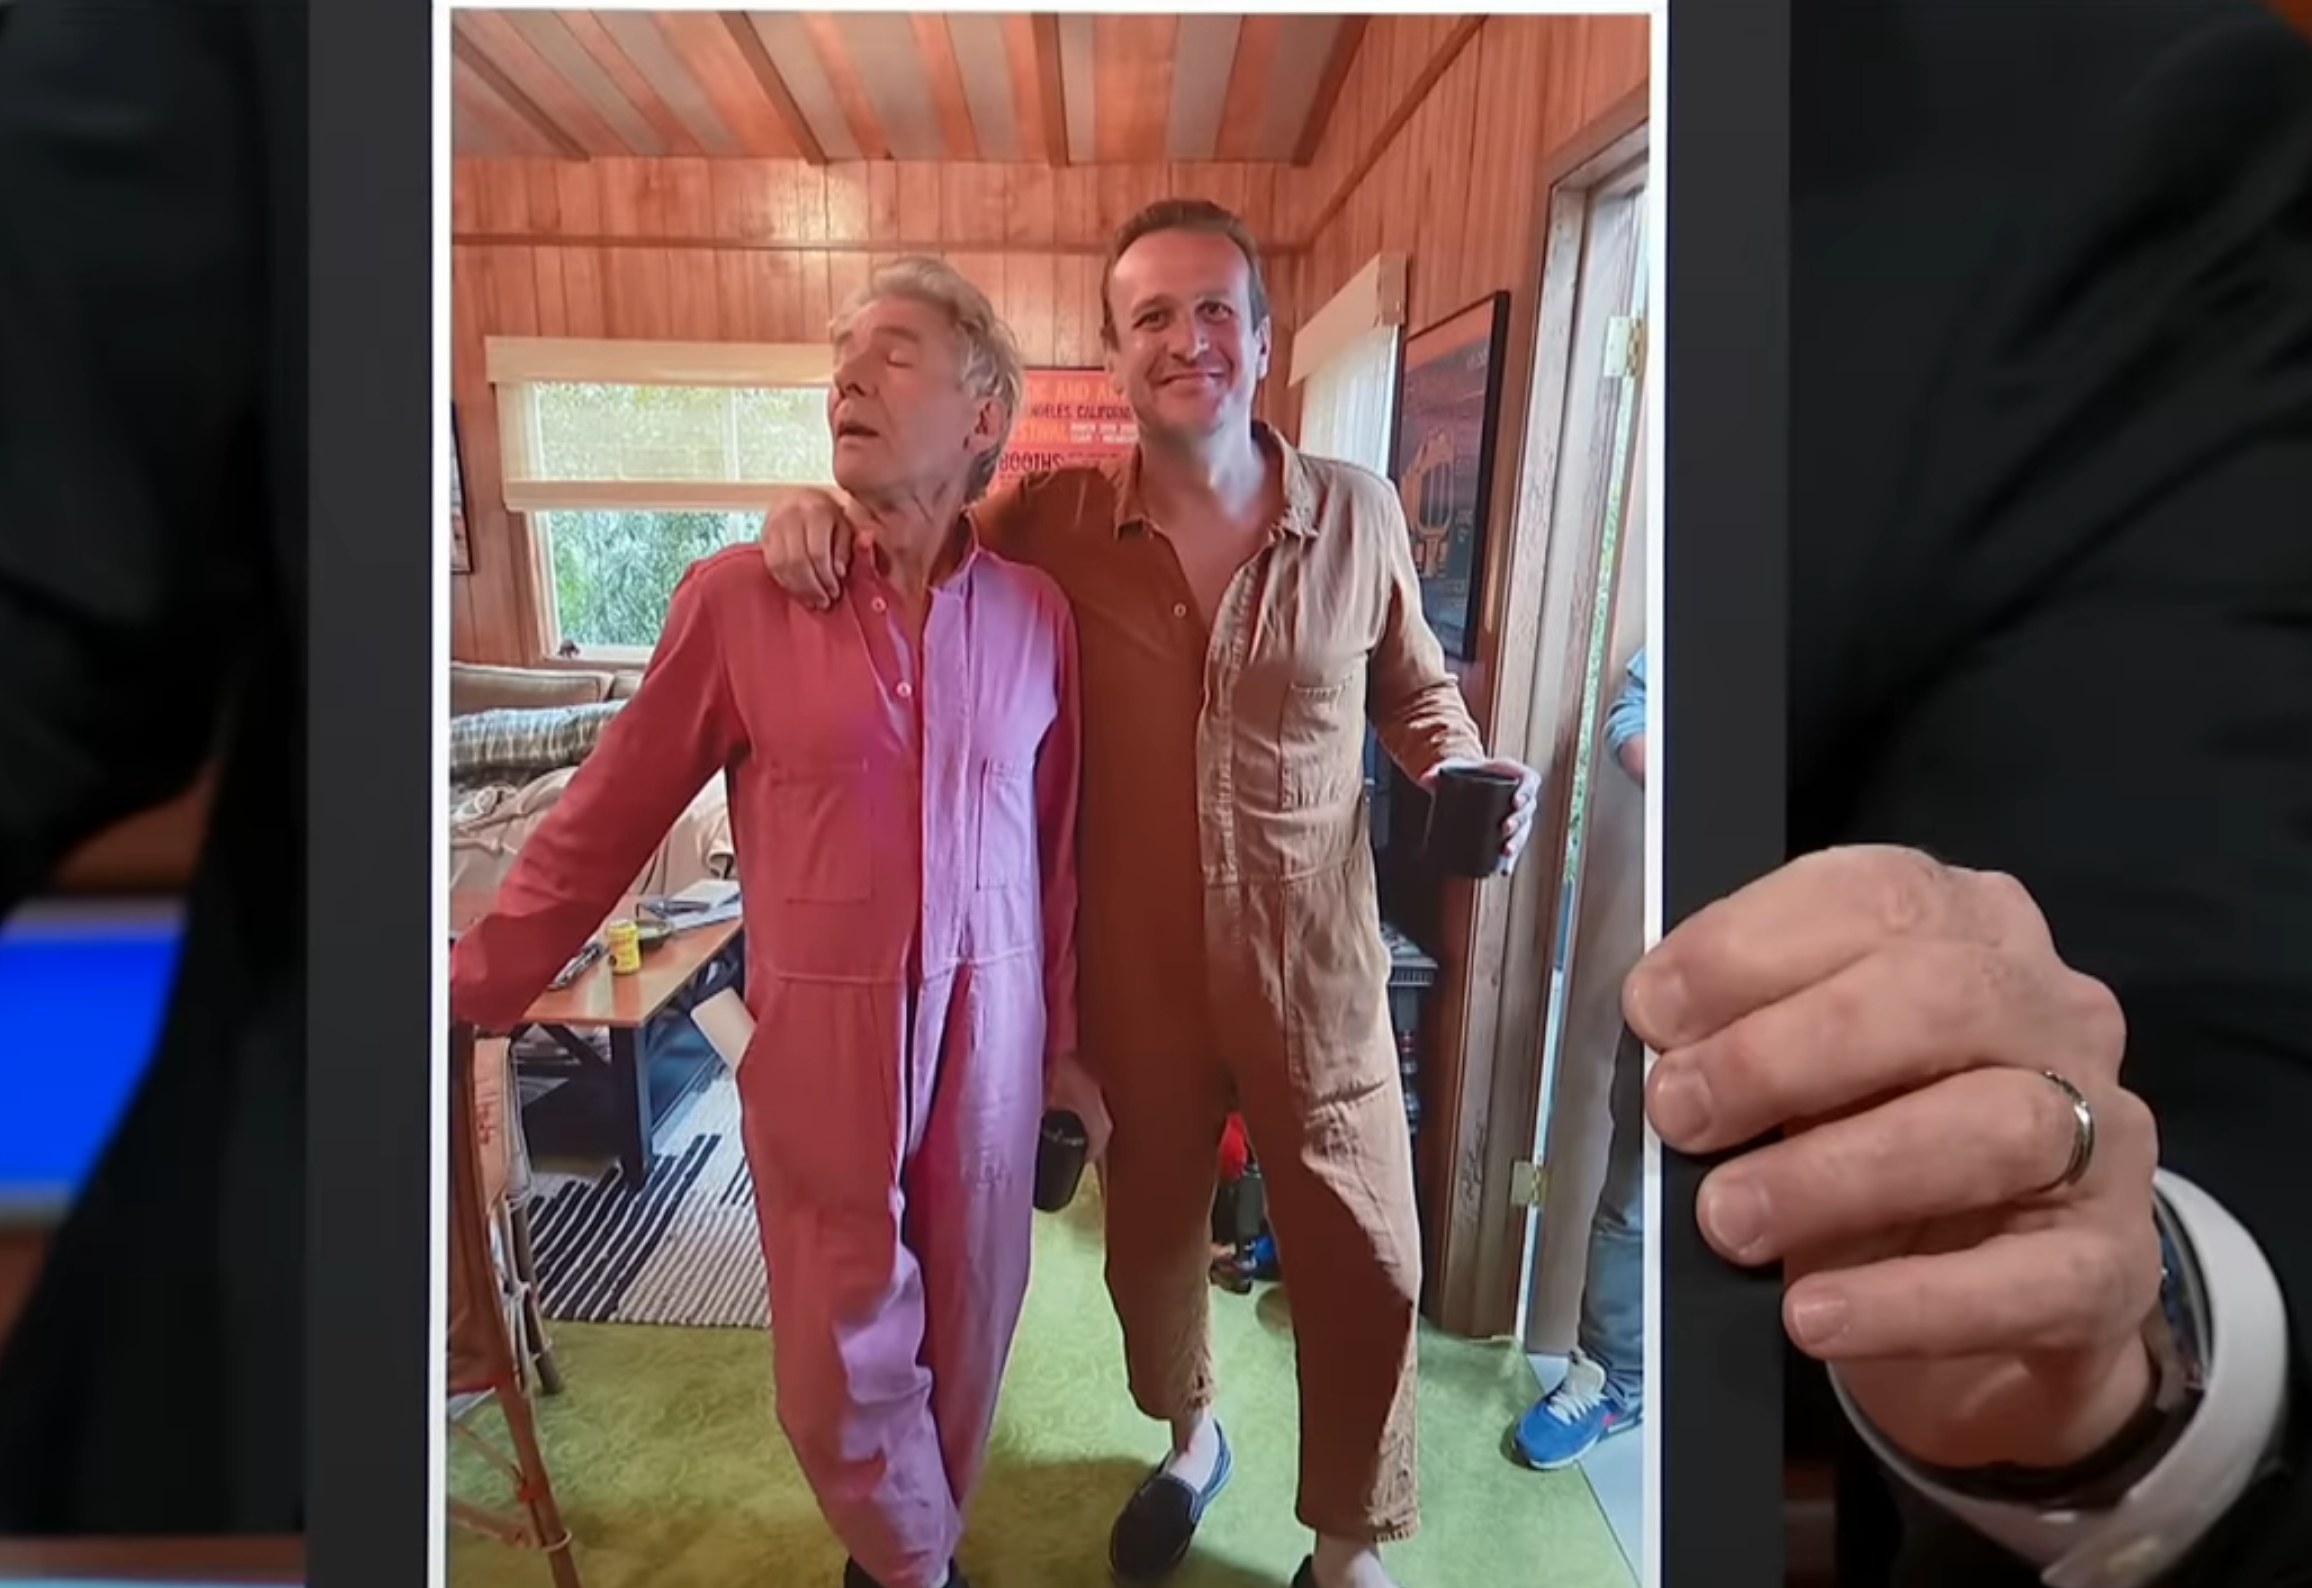 Stephen Colbert shows a photo of Harrison Ford and Jason Segel wearing jumpsuits together behind the scenes of &quot;Shrinking&quot;